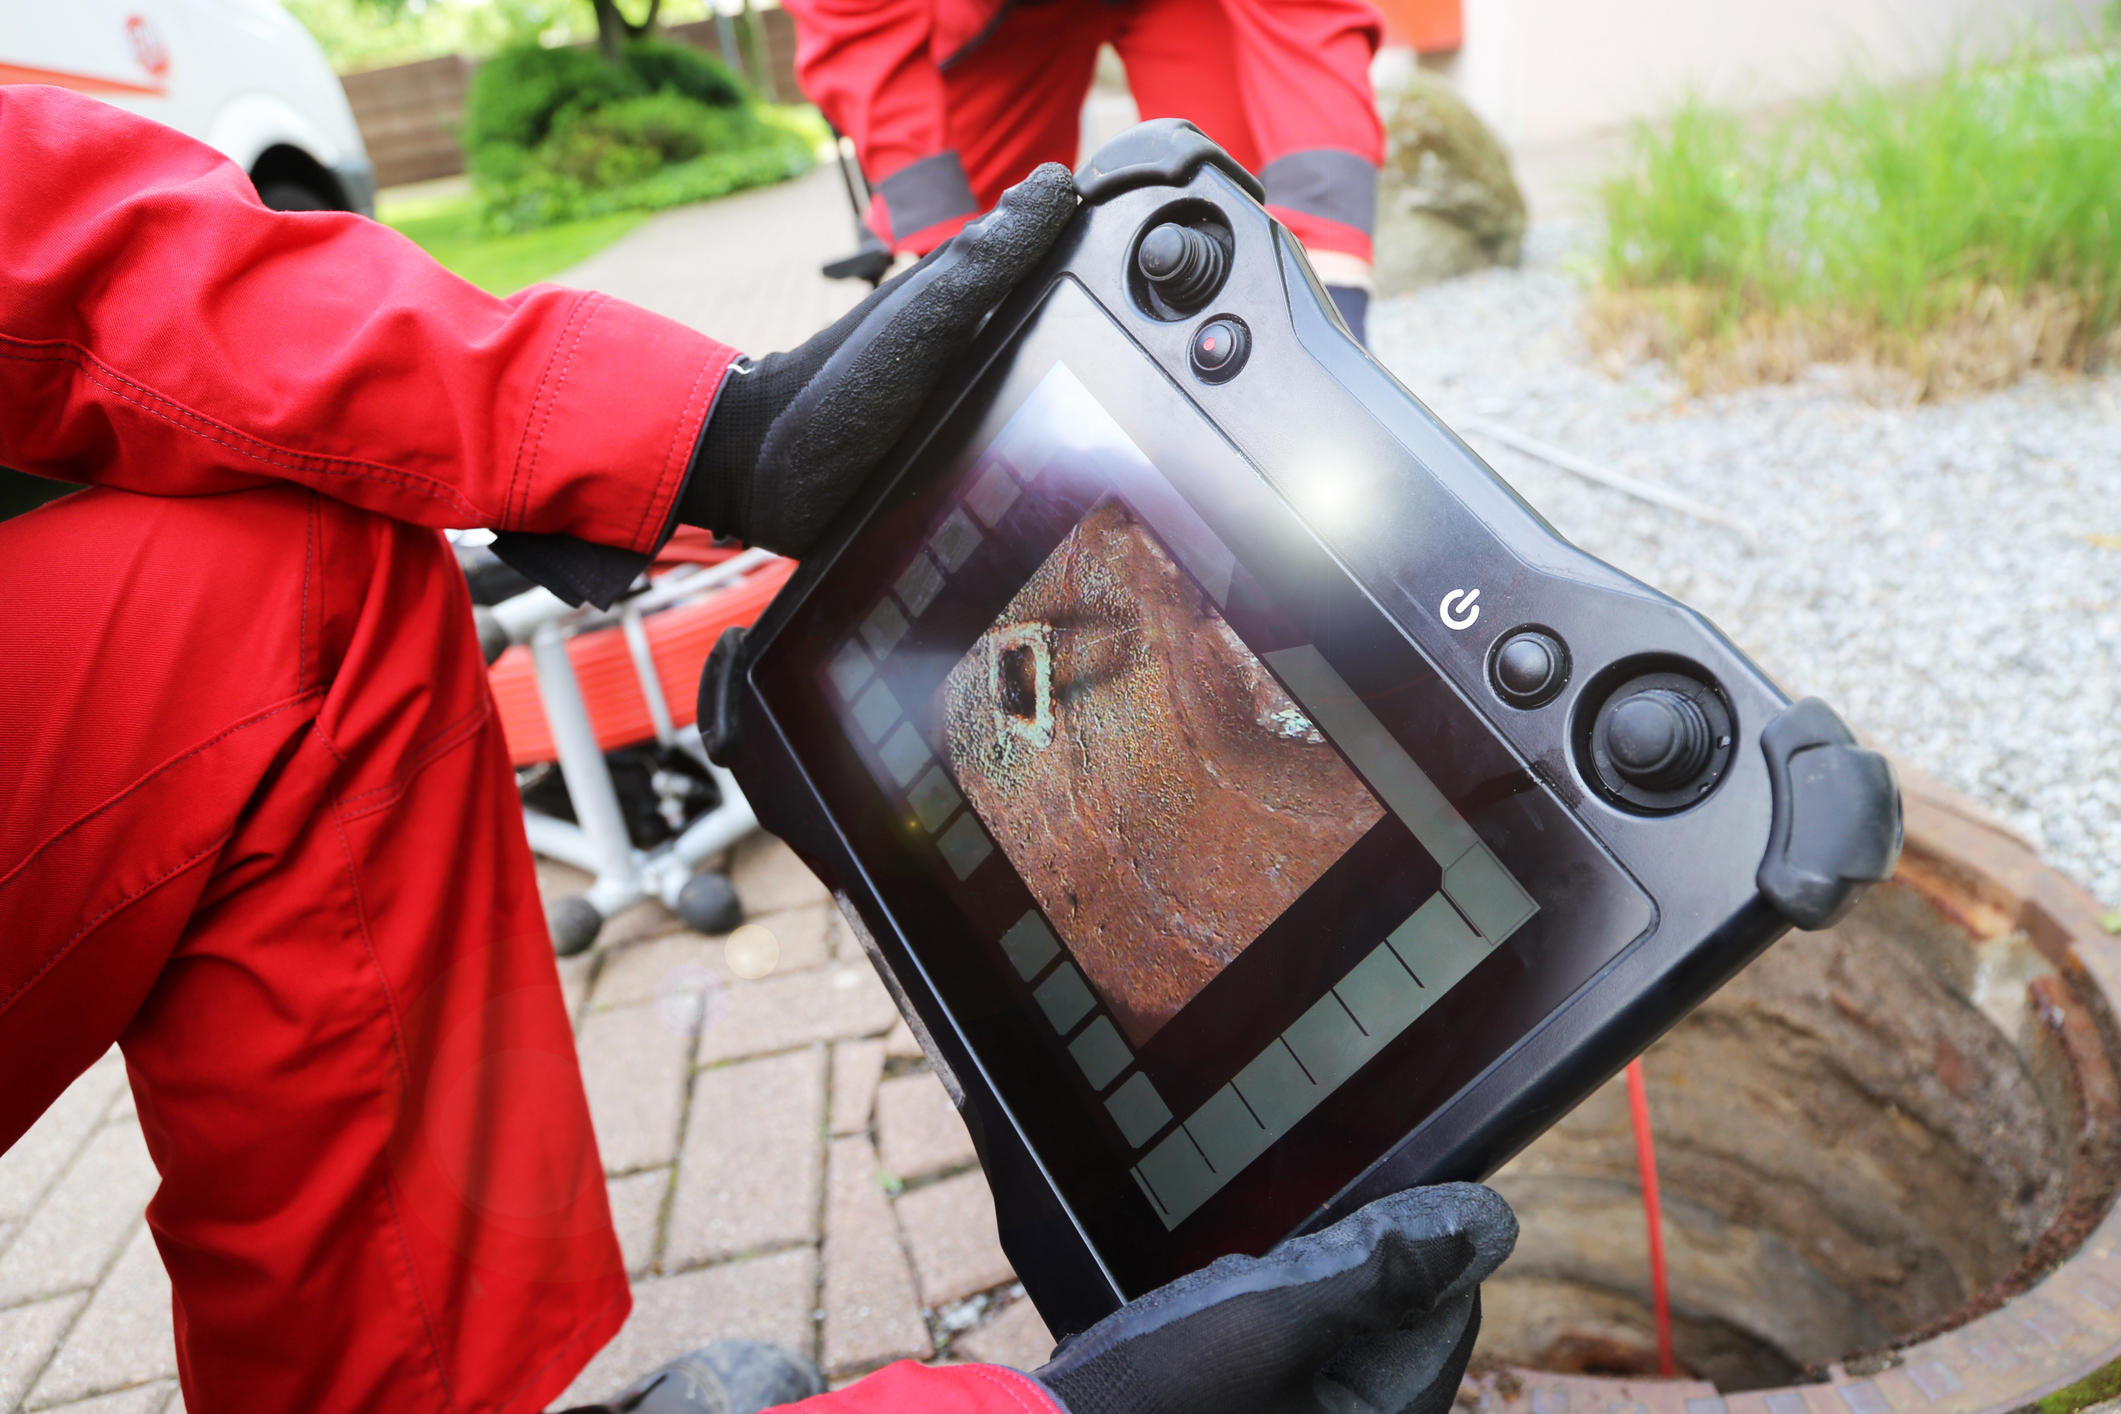 Magnum Vac Service provides video inspection services using CCTV cameras to assess the condition of your underground infrastructure. We can use this tool to
identify defects, leaks, and structural issues for proactive maintenance and repair.